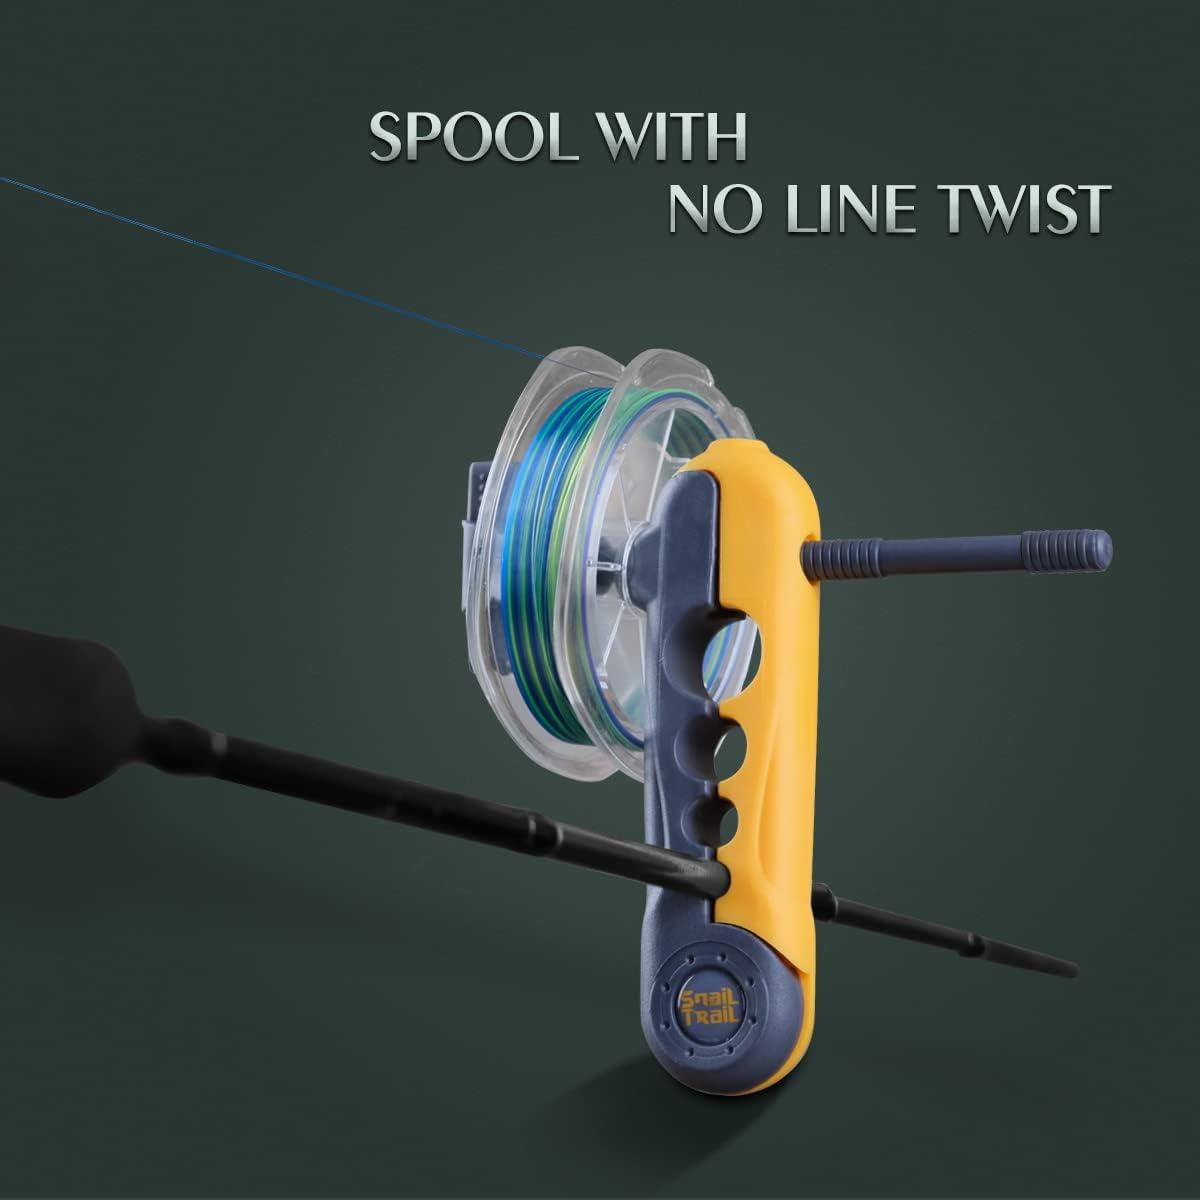 SNAIL TRAIL Electric Braided Fishing Line Stripper, Spinning Reel Line  Spooler, Baitcast Reel Portable Line Winder, Line Remover Spool System, Fish  Hook Sharpener, Fishing Tool Kit, Gift For Fisherman, Line Spooling  Accessories 